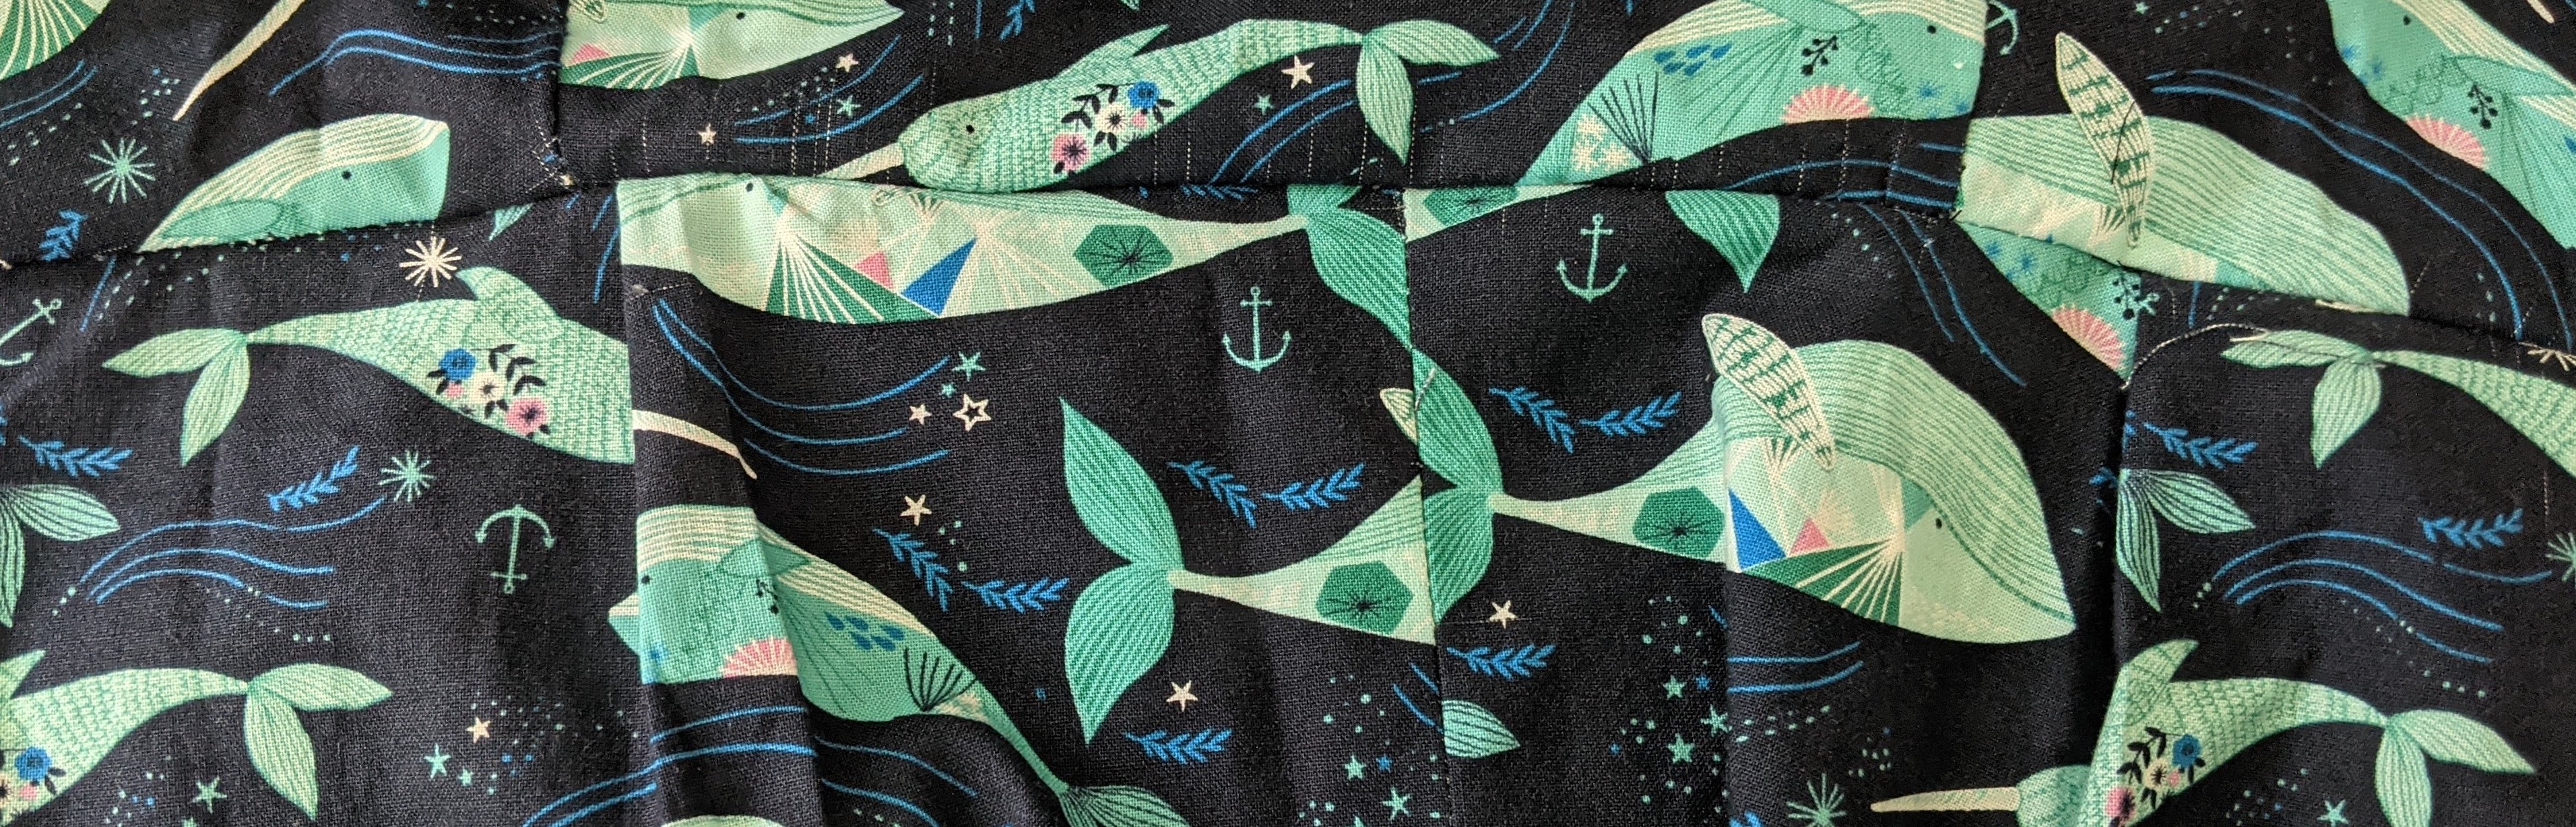 Dark blue fabric with light blue narwhals and whales on it, with little anchors, flowers and stars decorating the space between them